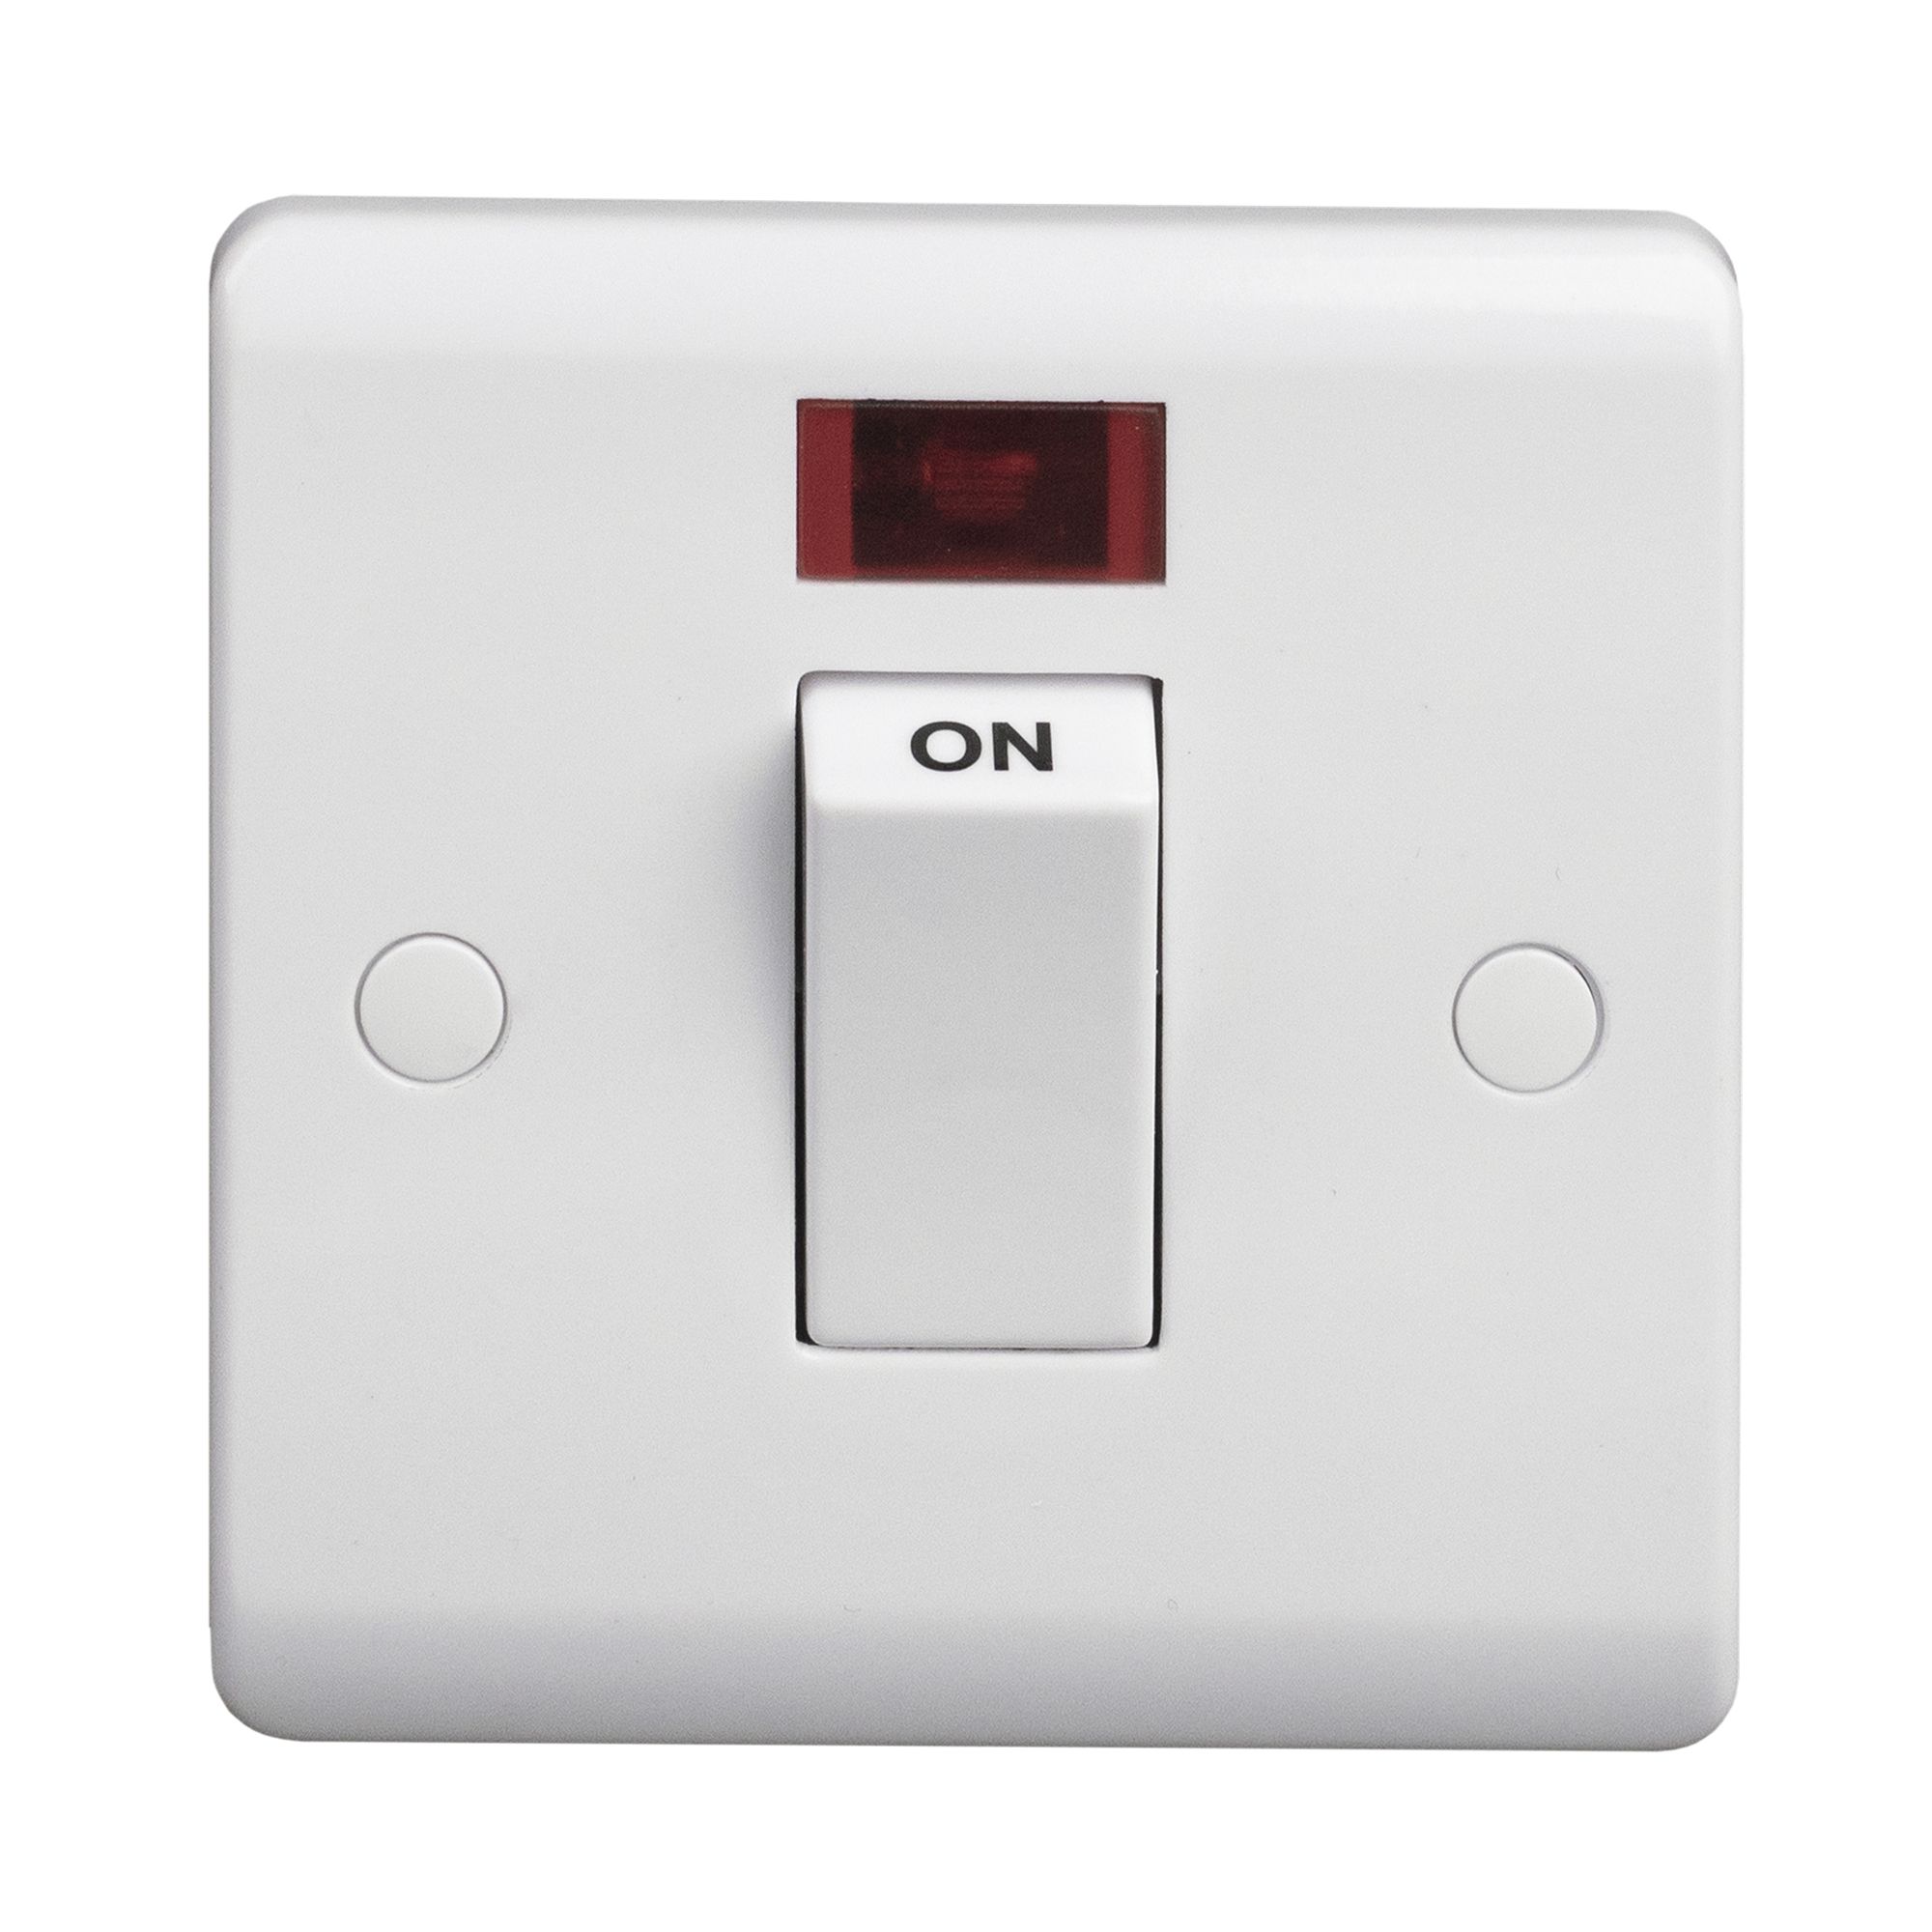 LAP 45A Rocker Raised slim Control switch with LED indicator Gloss White